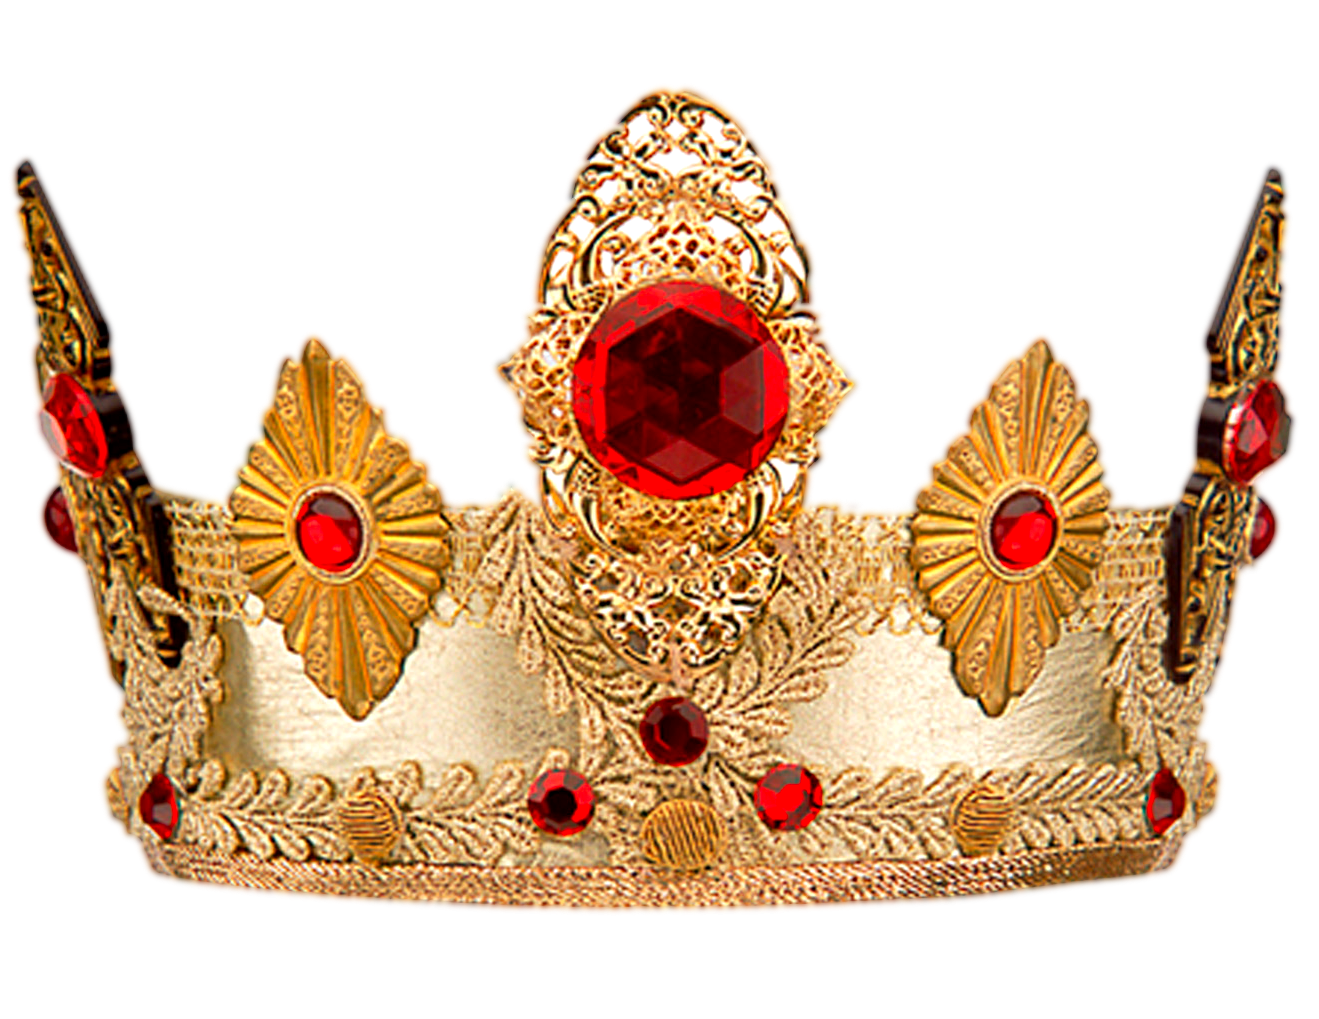 Crown PNG Photo